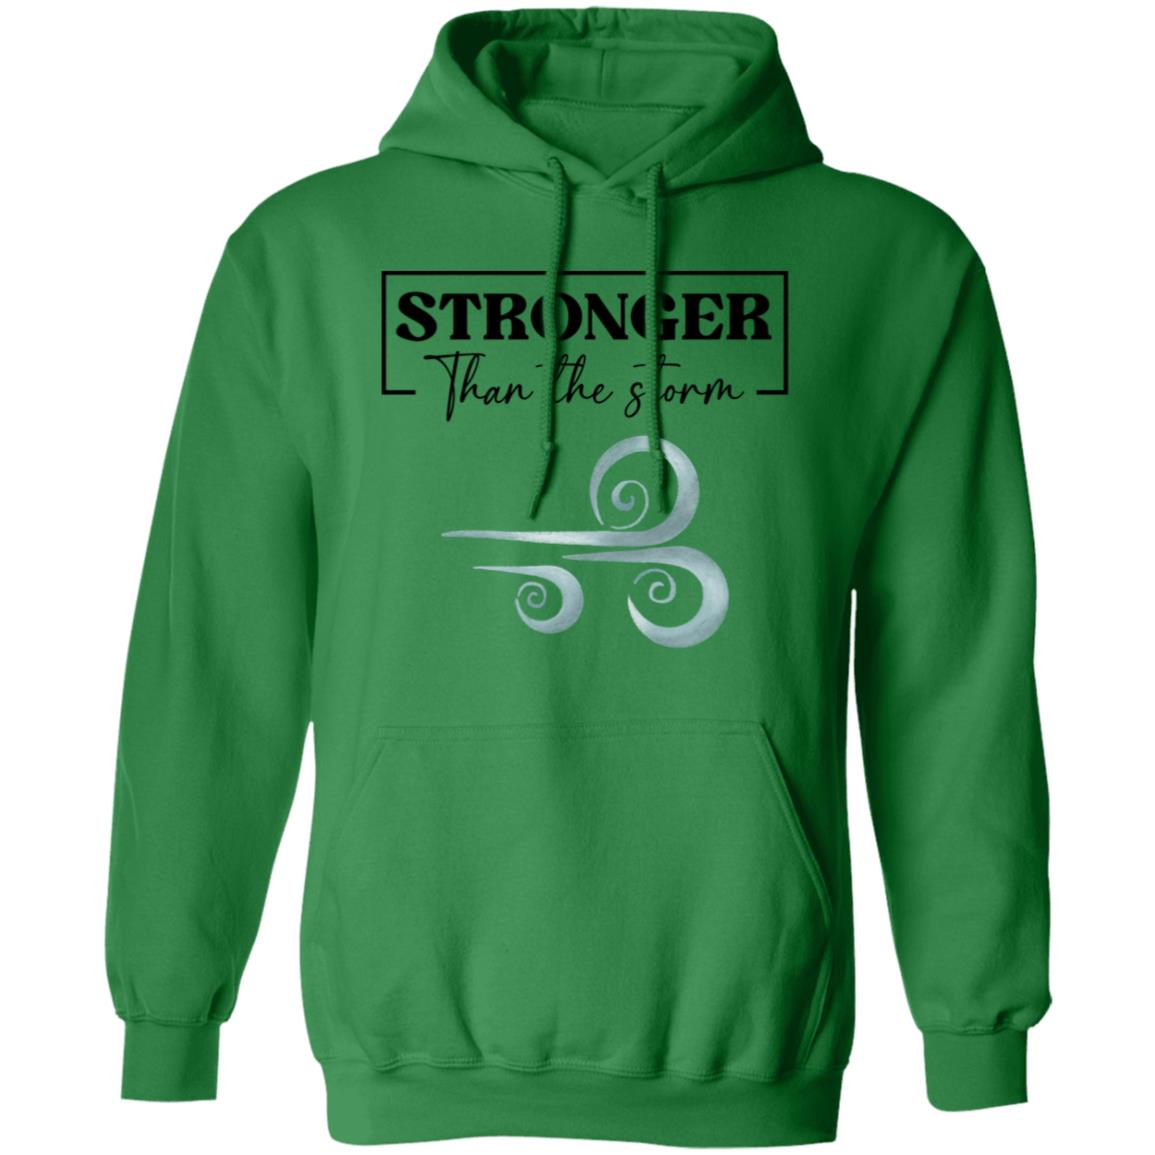 Stronger Than the Storm Gildan Pullover Hoodie | FREE SHIPPING